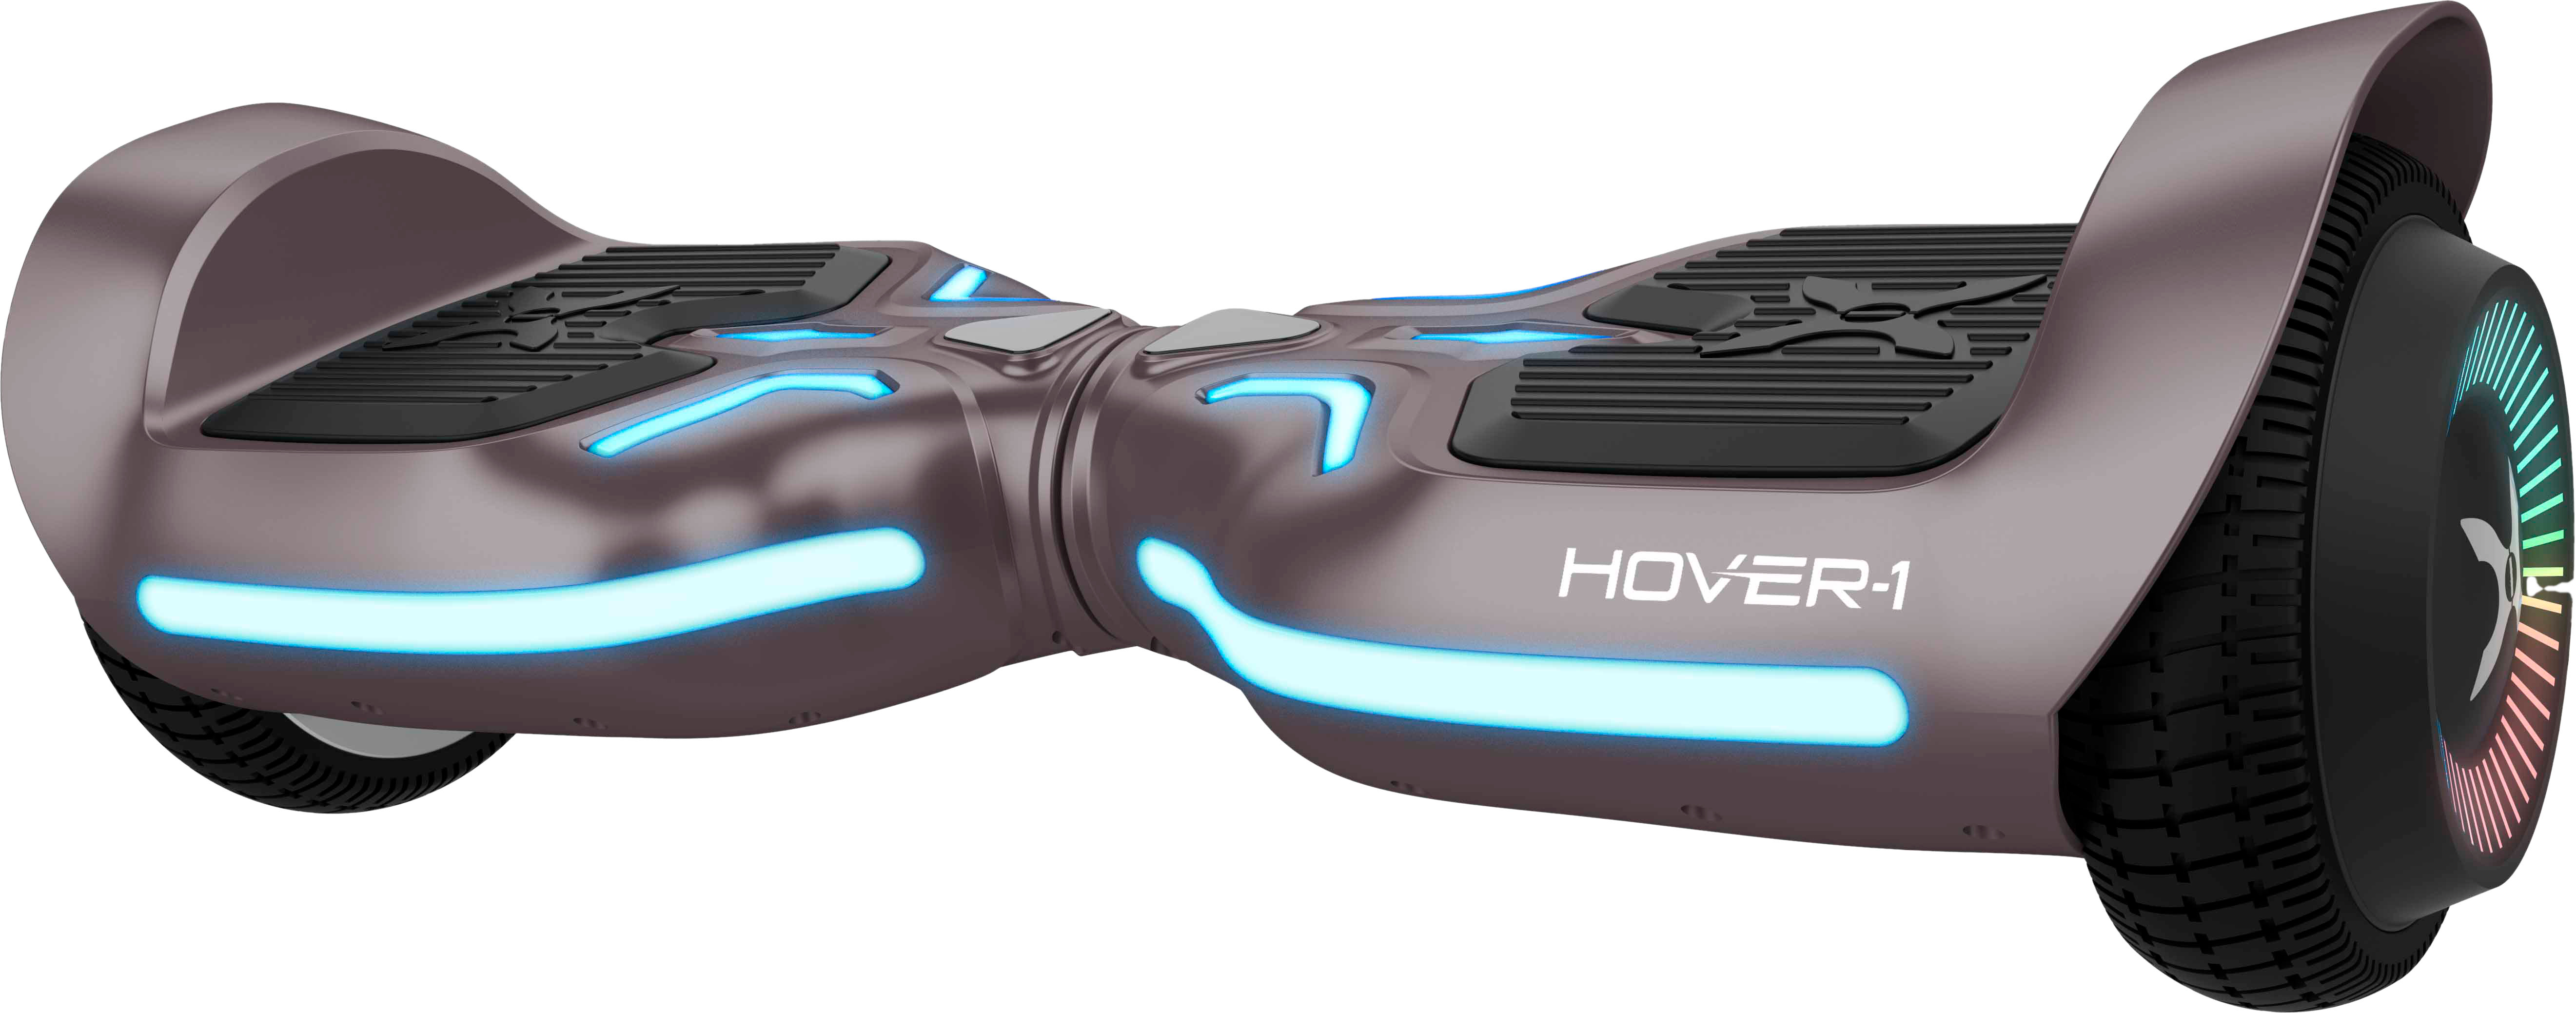 Hover-1 - Ranger Hoverboard with Bluetooth Speaker - $139.99 ($60 off)